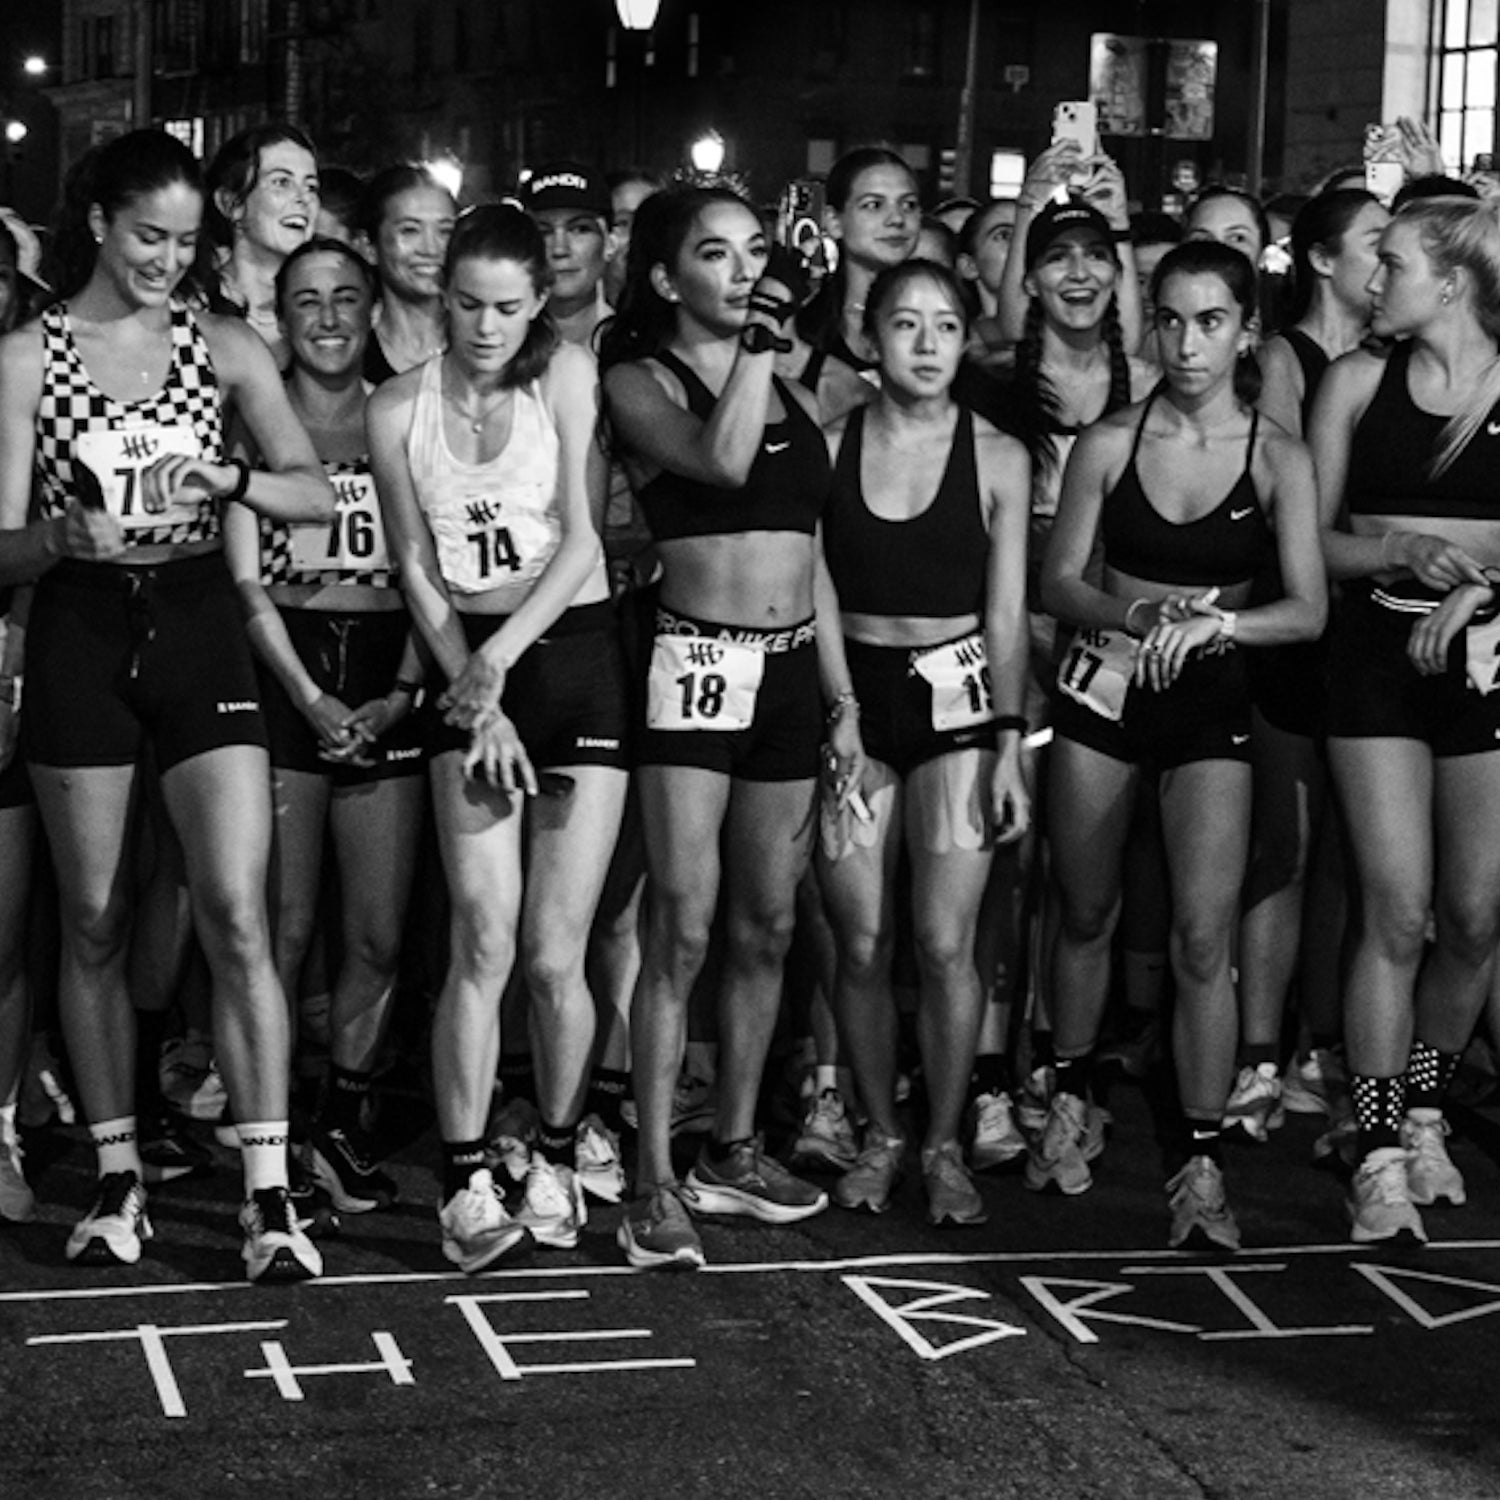 Adidas launches initiative to make women feel safer while running